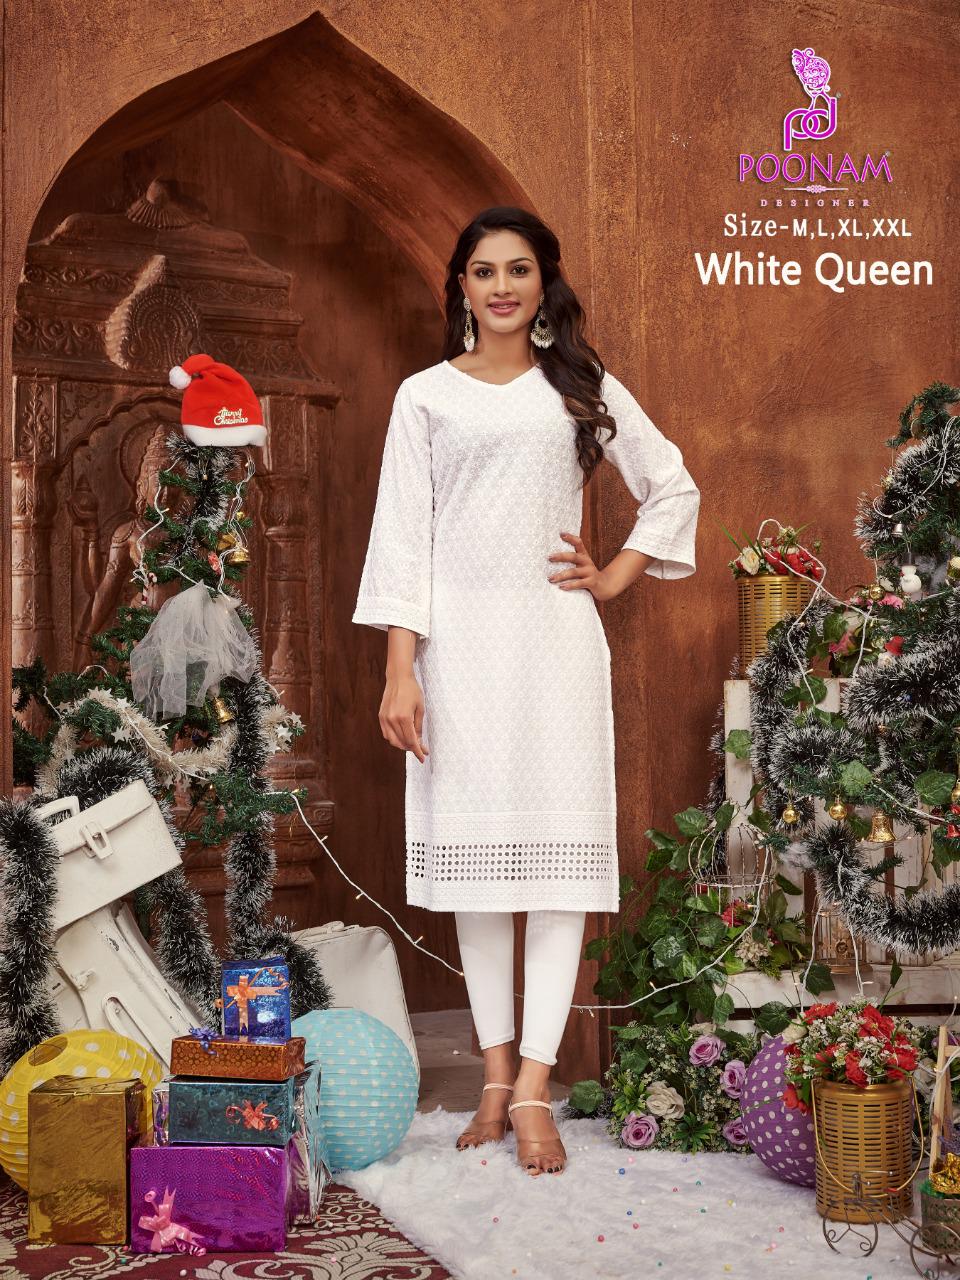 Poonam White Queen collection 2